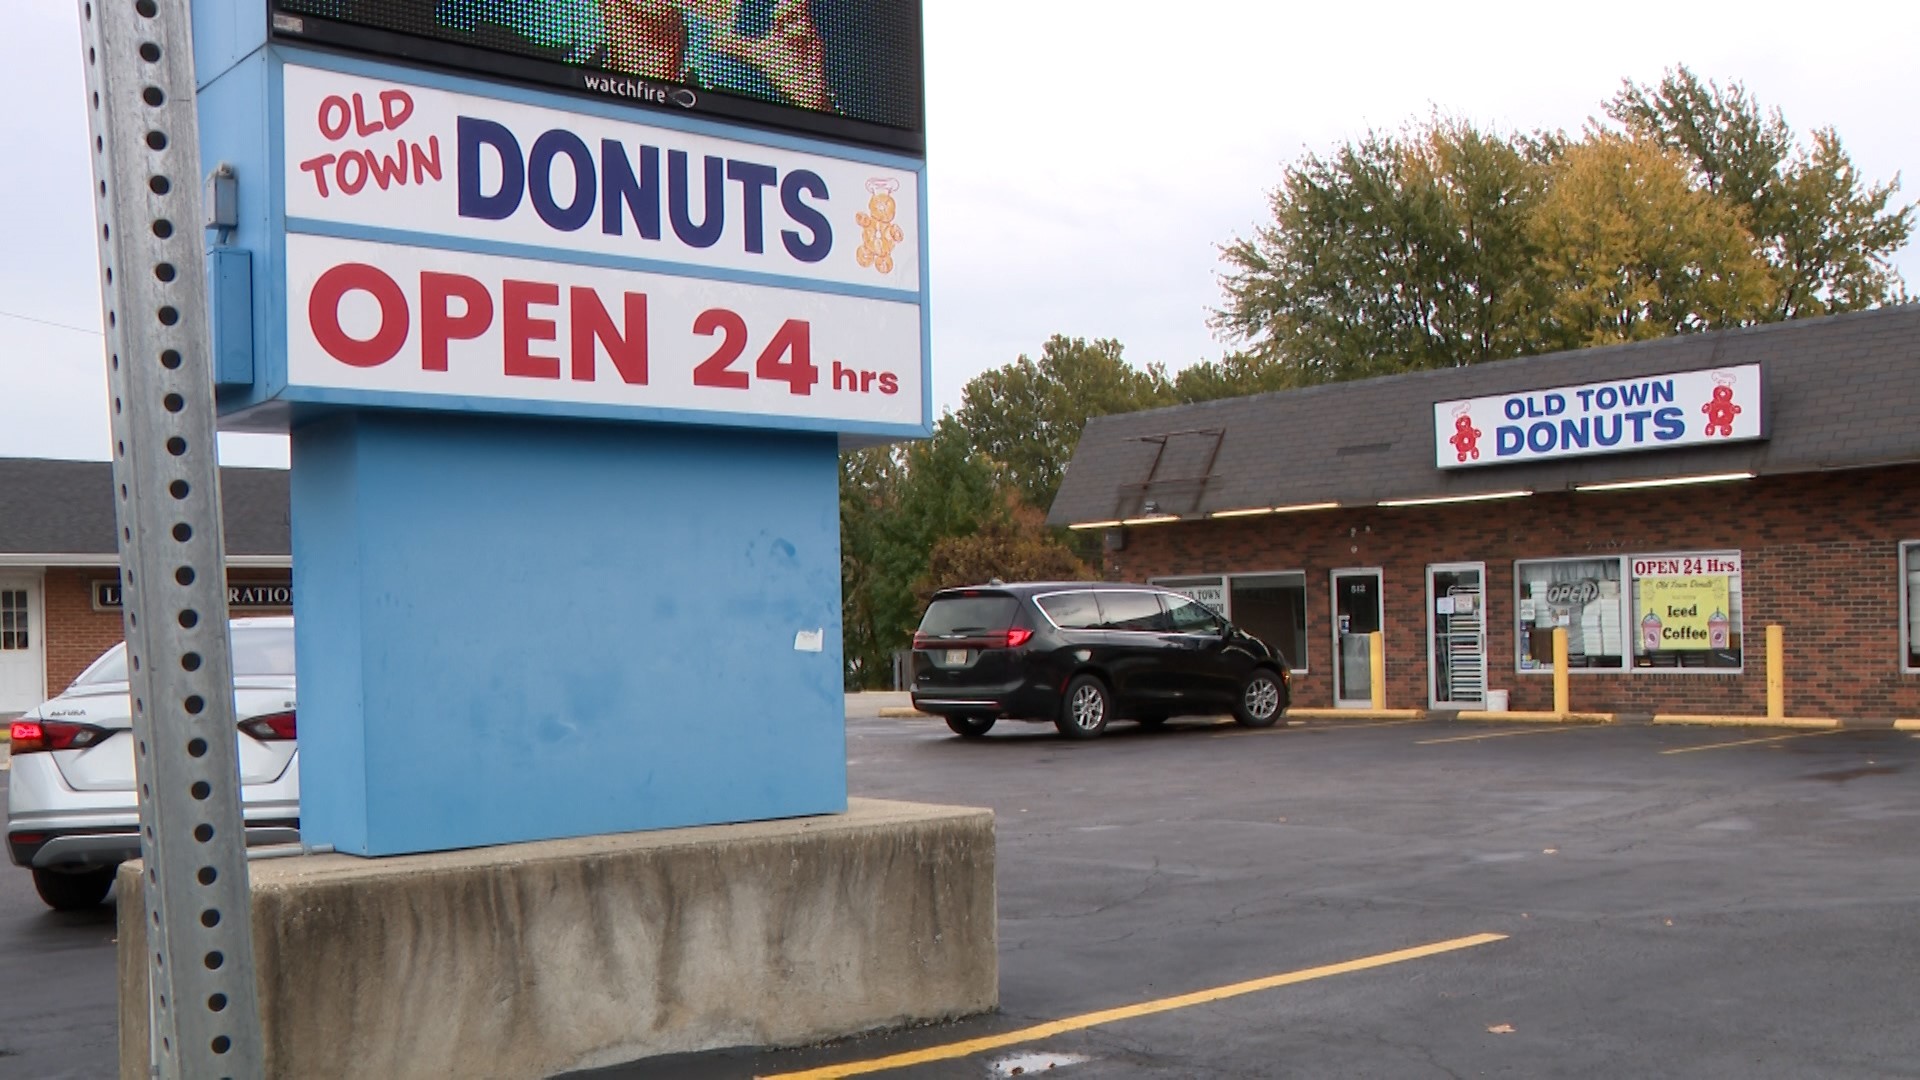 The 30-year revolving door of Old Town Donuts has come to a temporary halt.